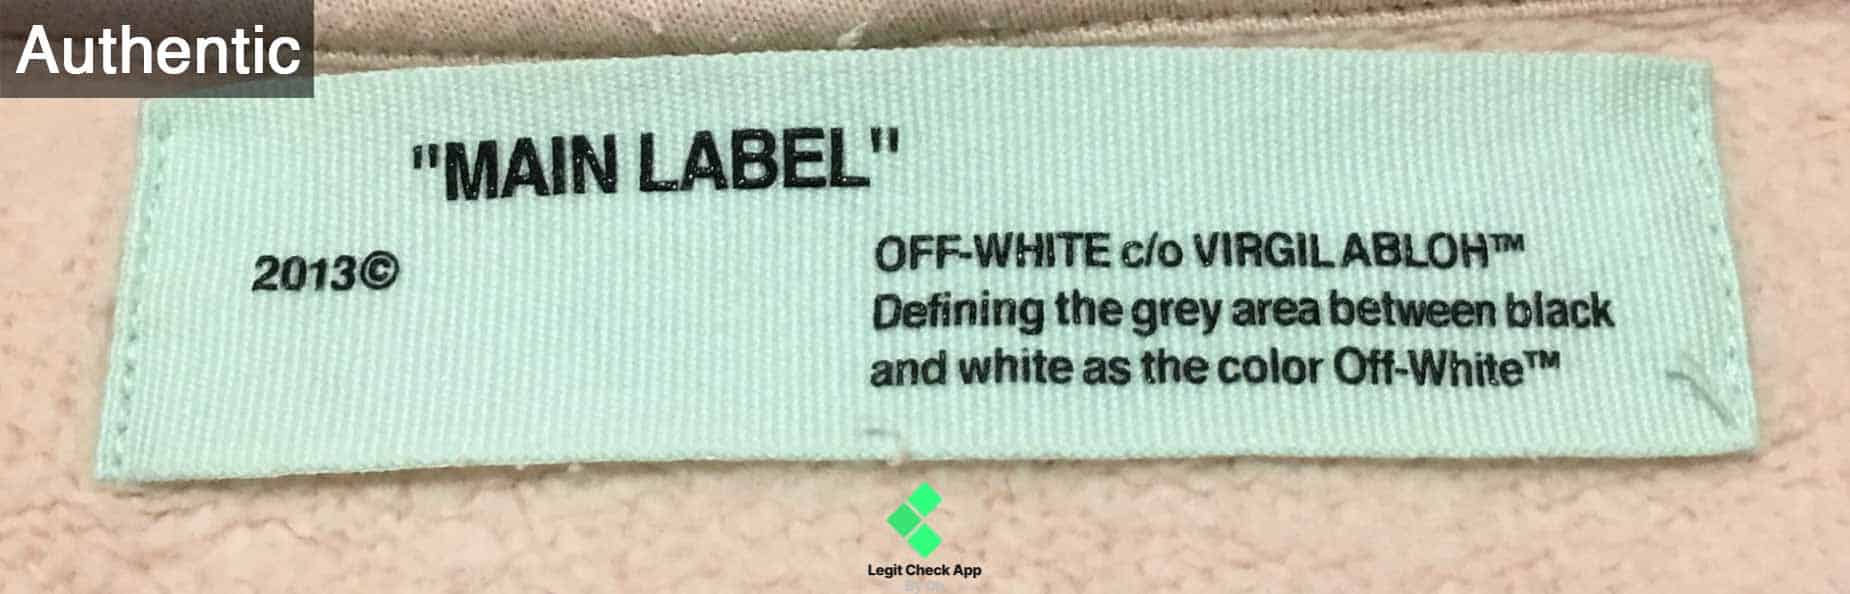 How To Spot Fake Real White Clothing (Works For Any Off White)